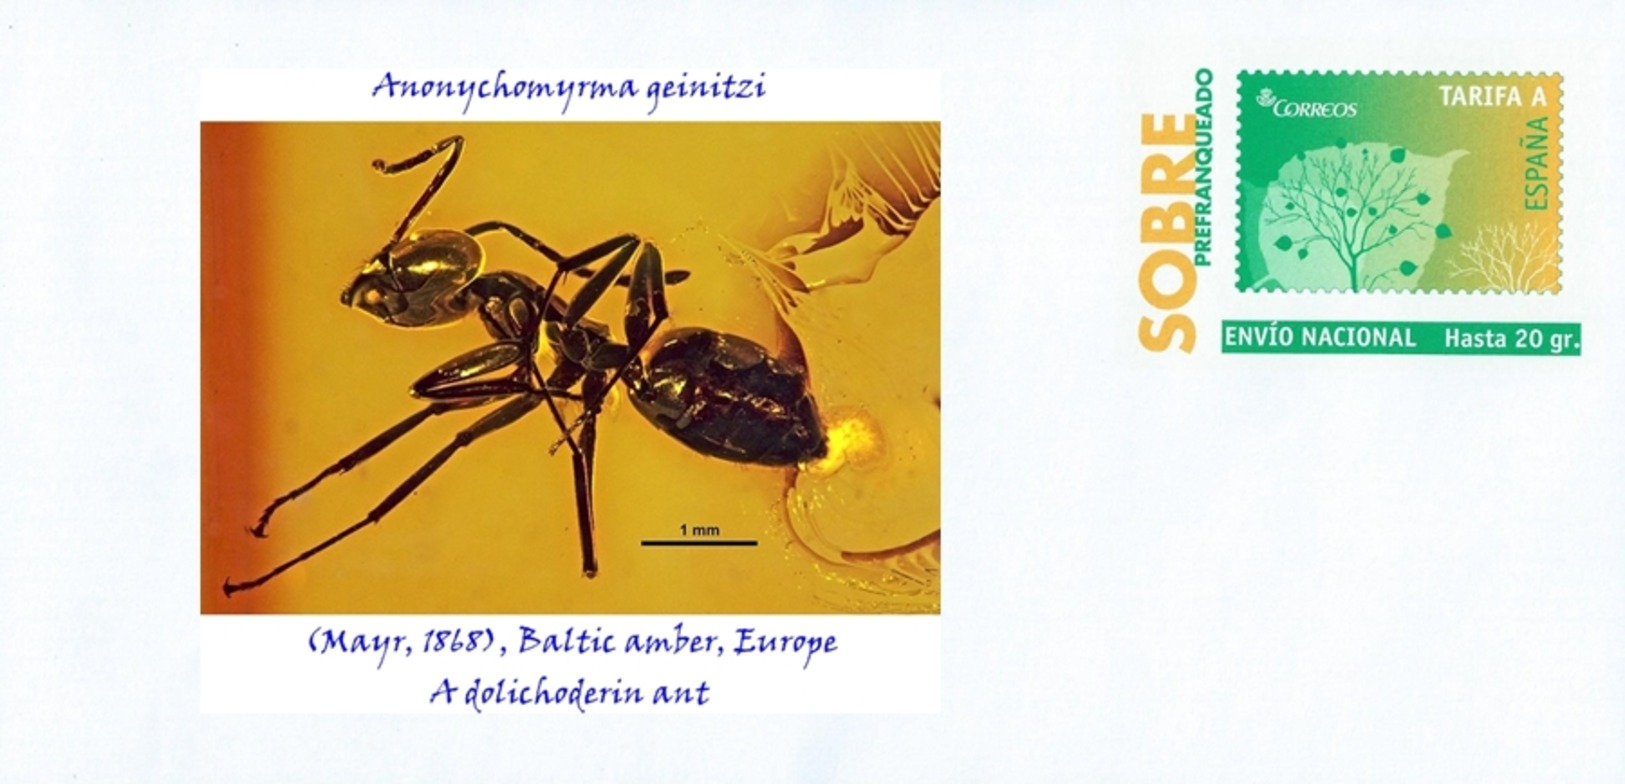 SPAIN, 2017 Fossil Insects, Anonychomyrma Geinitzi, A Dolichoderin Ant, (Mayr, 1868), Baltic Amber, Europe - Fossils